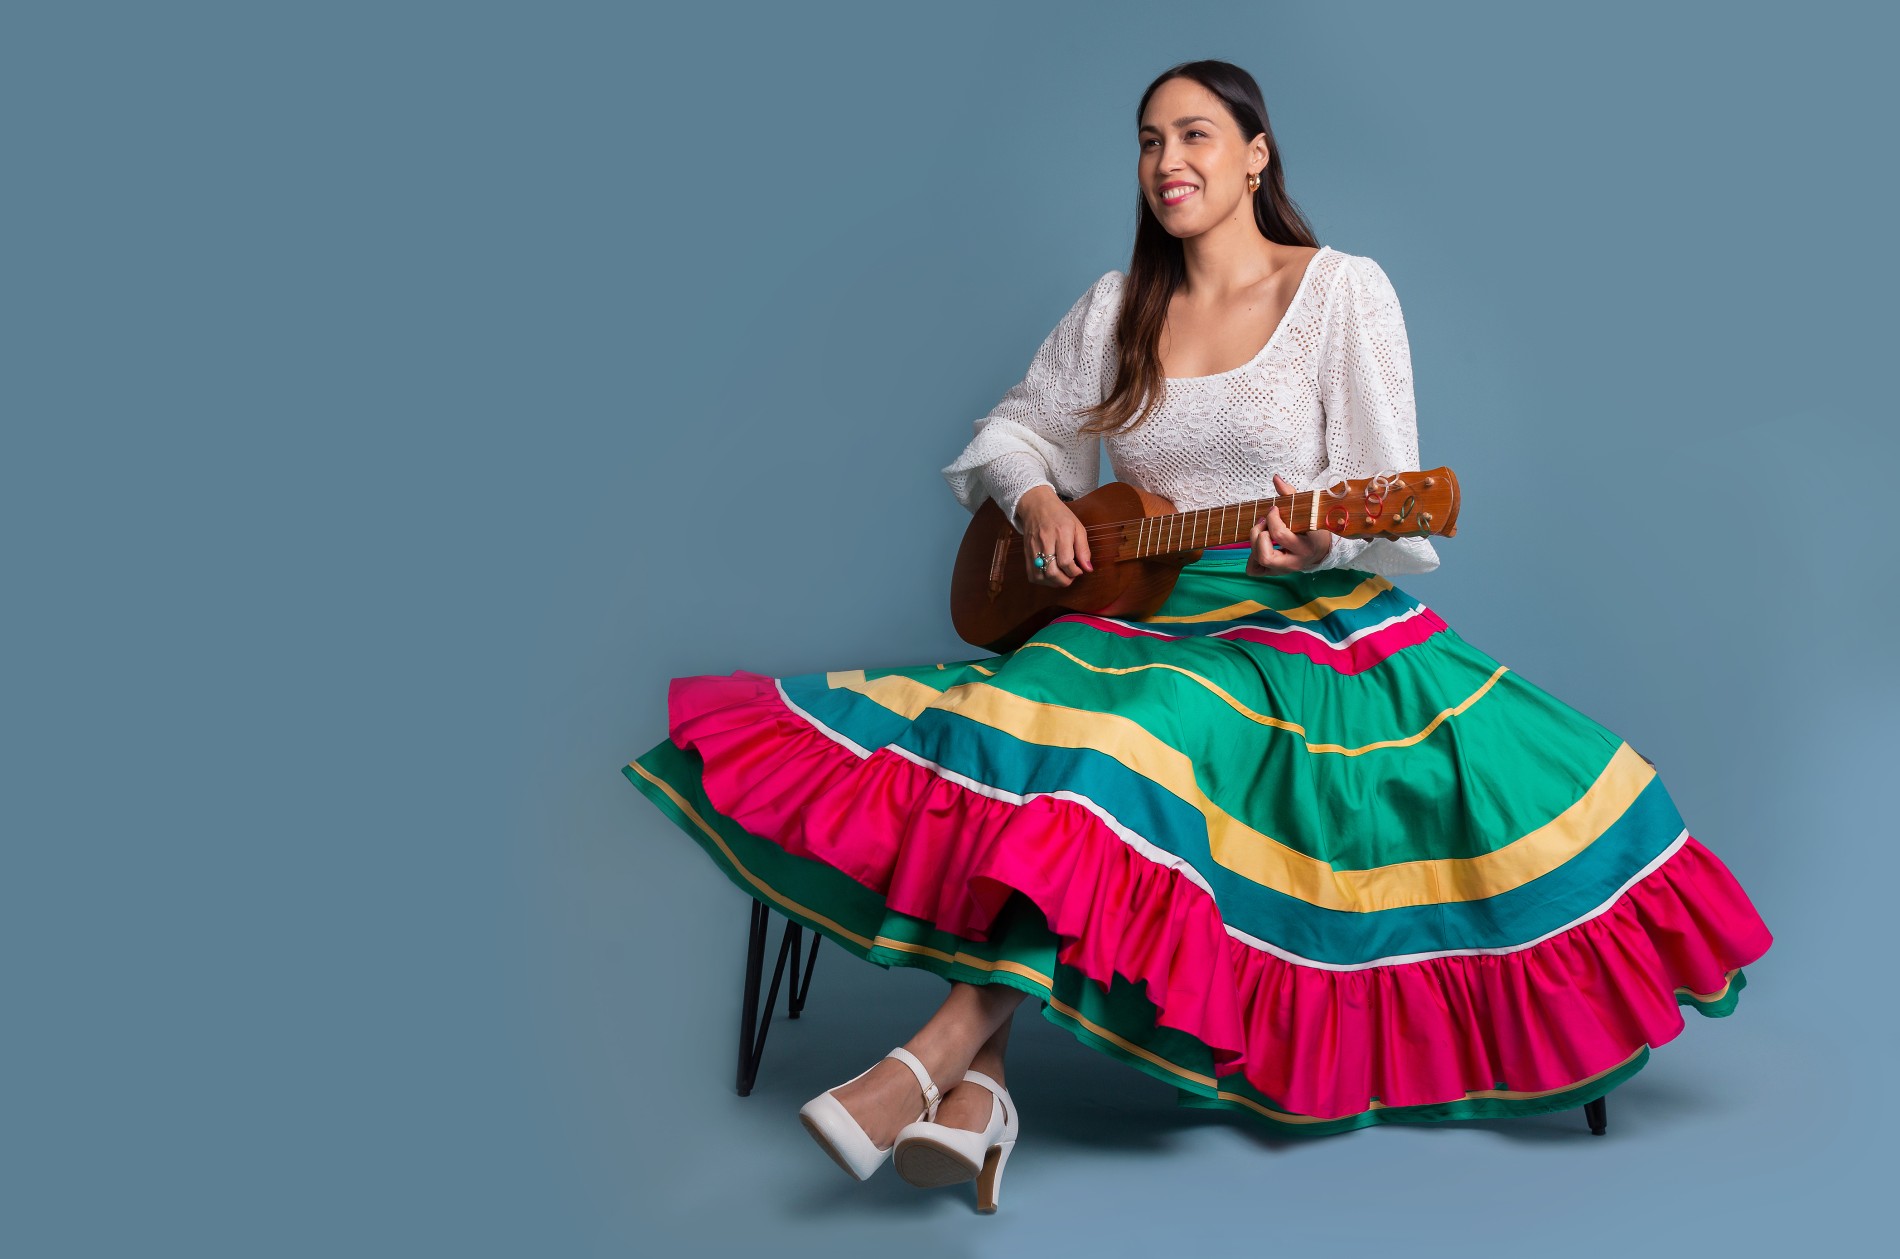 Sonia de los Santos, seated on a bench and wearing a colorful, full skirt and white blouse, strumming a wooden guitar.